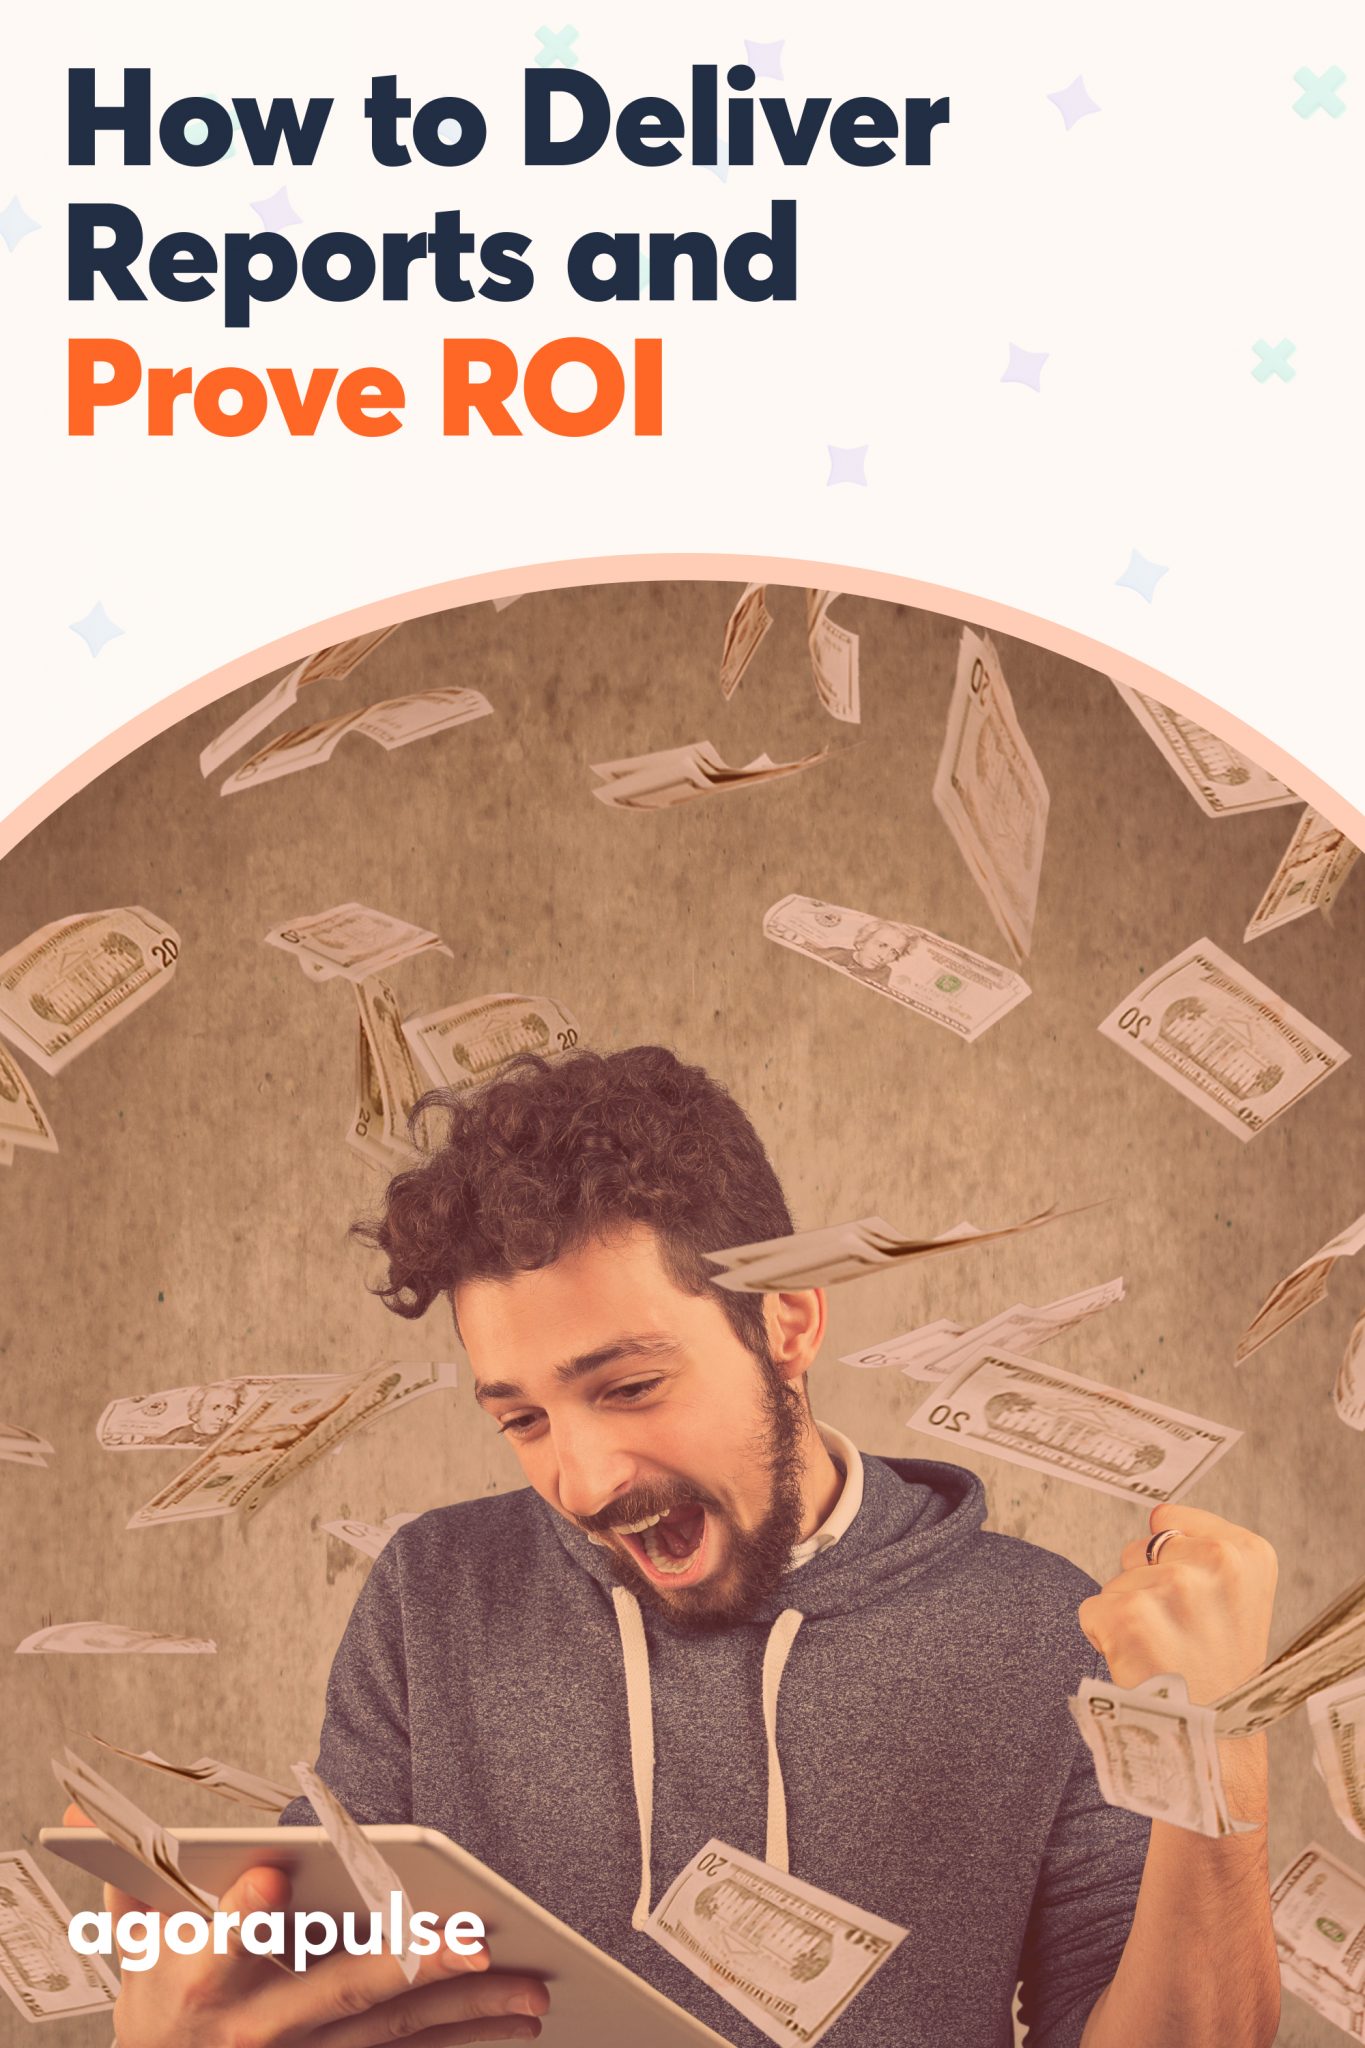 Agency Summit Series: How to Become a Data-Driven Agency and Prove Social ROI